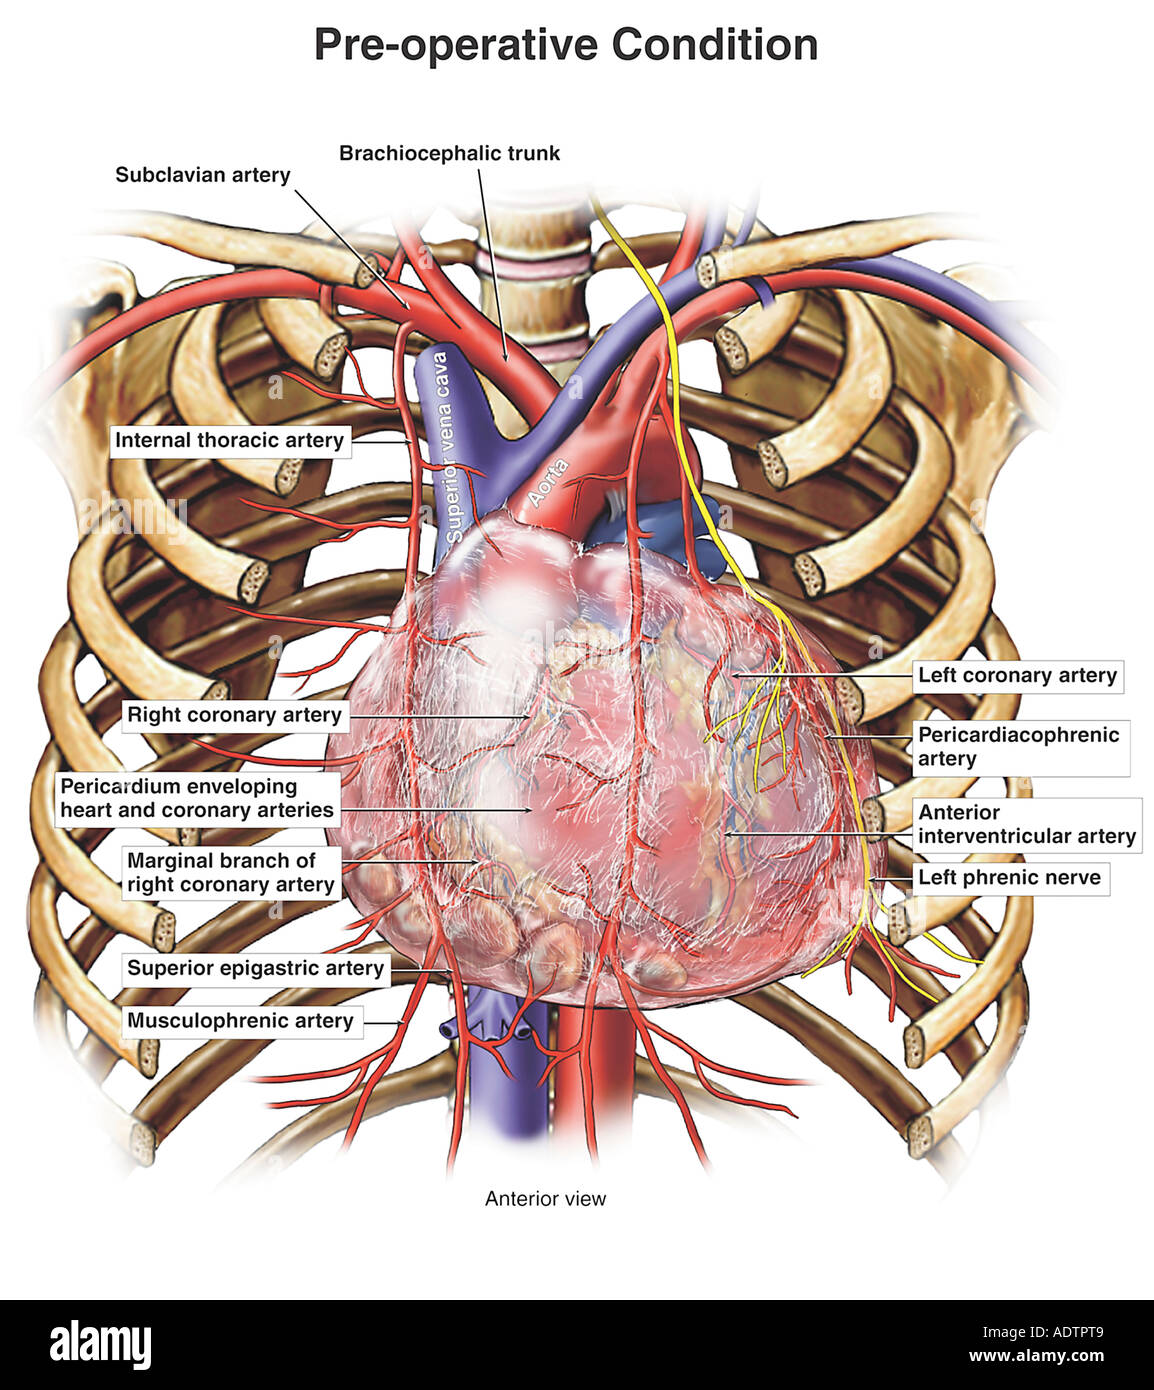 Vascular Anatomy Of The Neck And Upper Thorax Medivisuals Anatomy Of ...